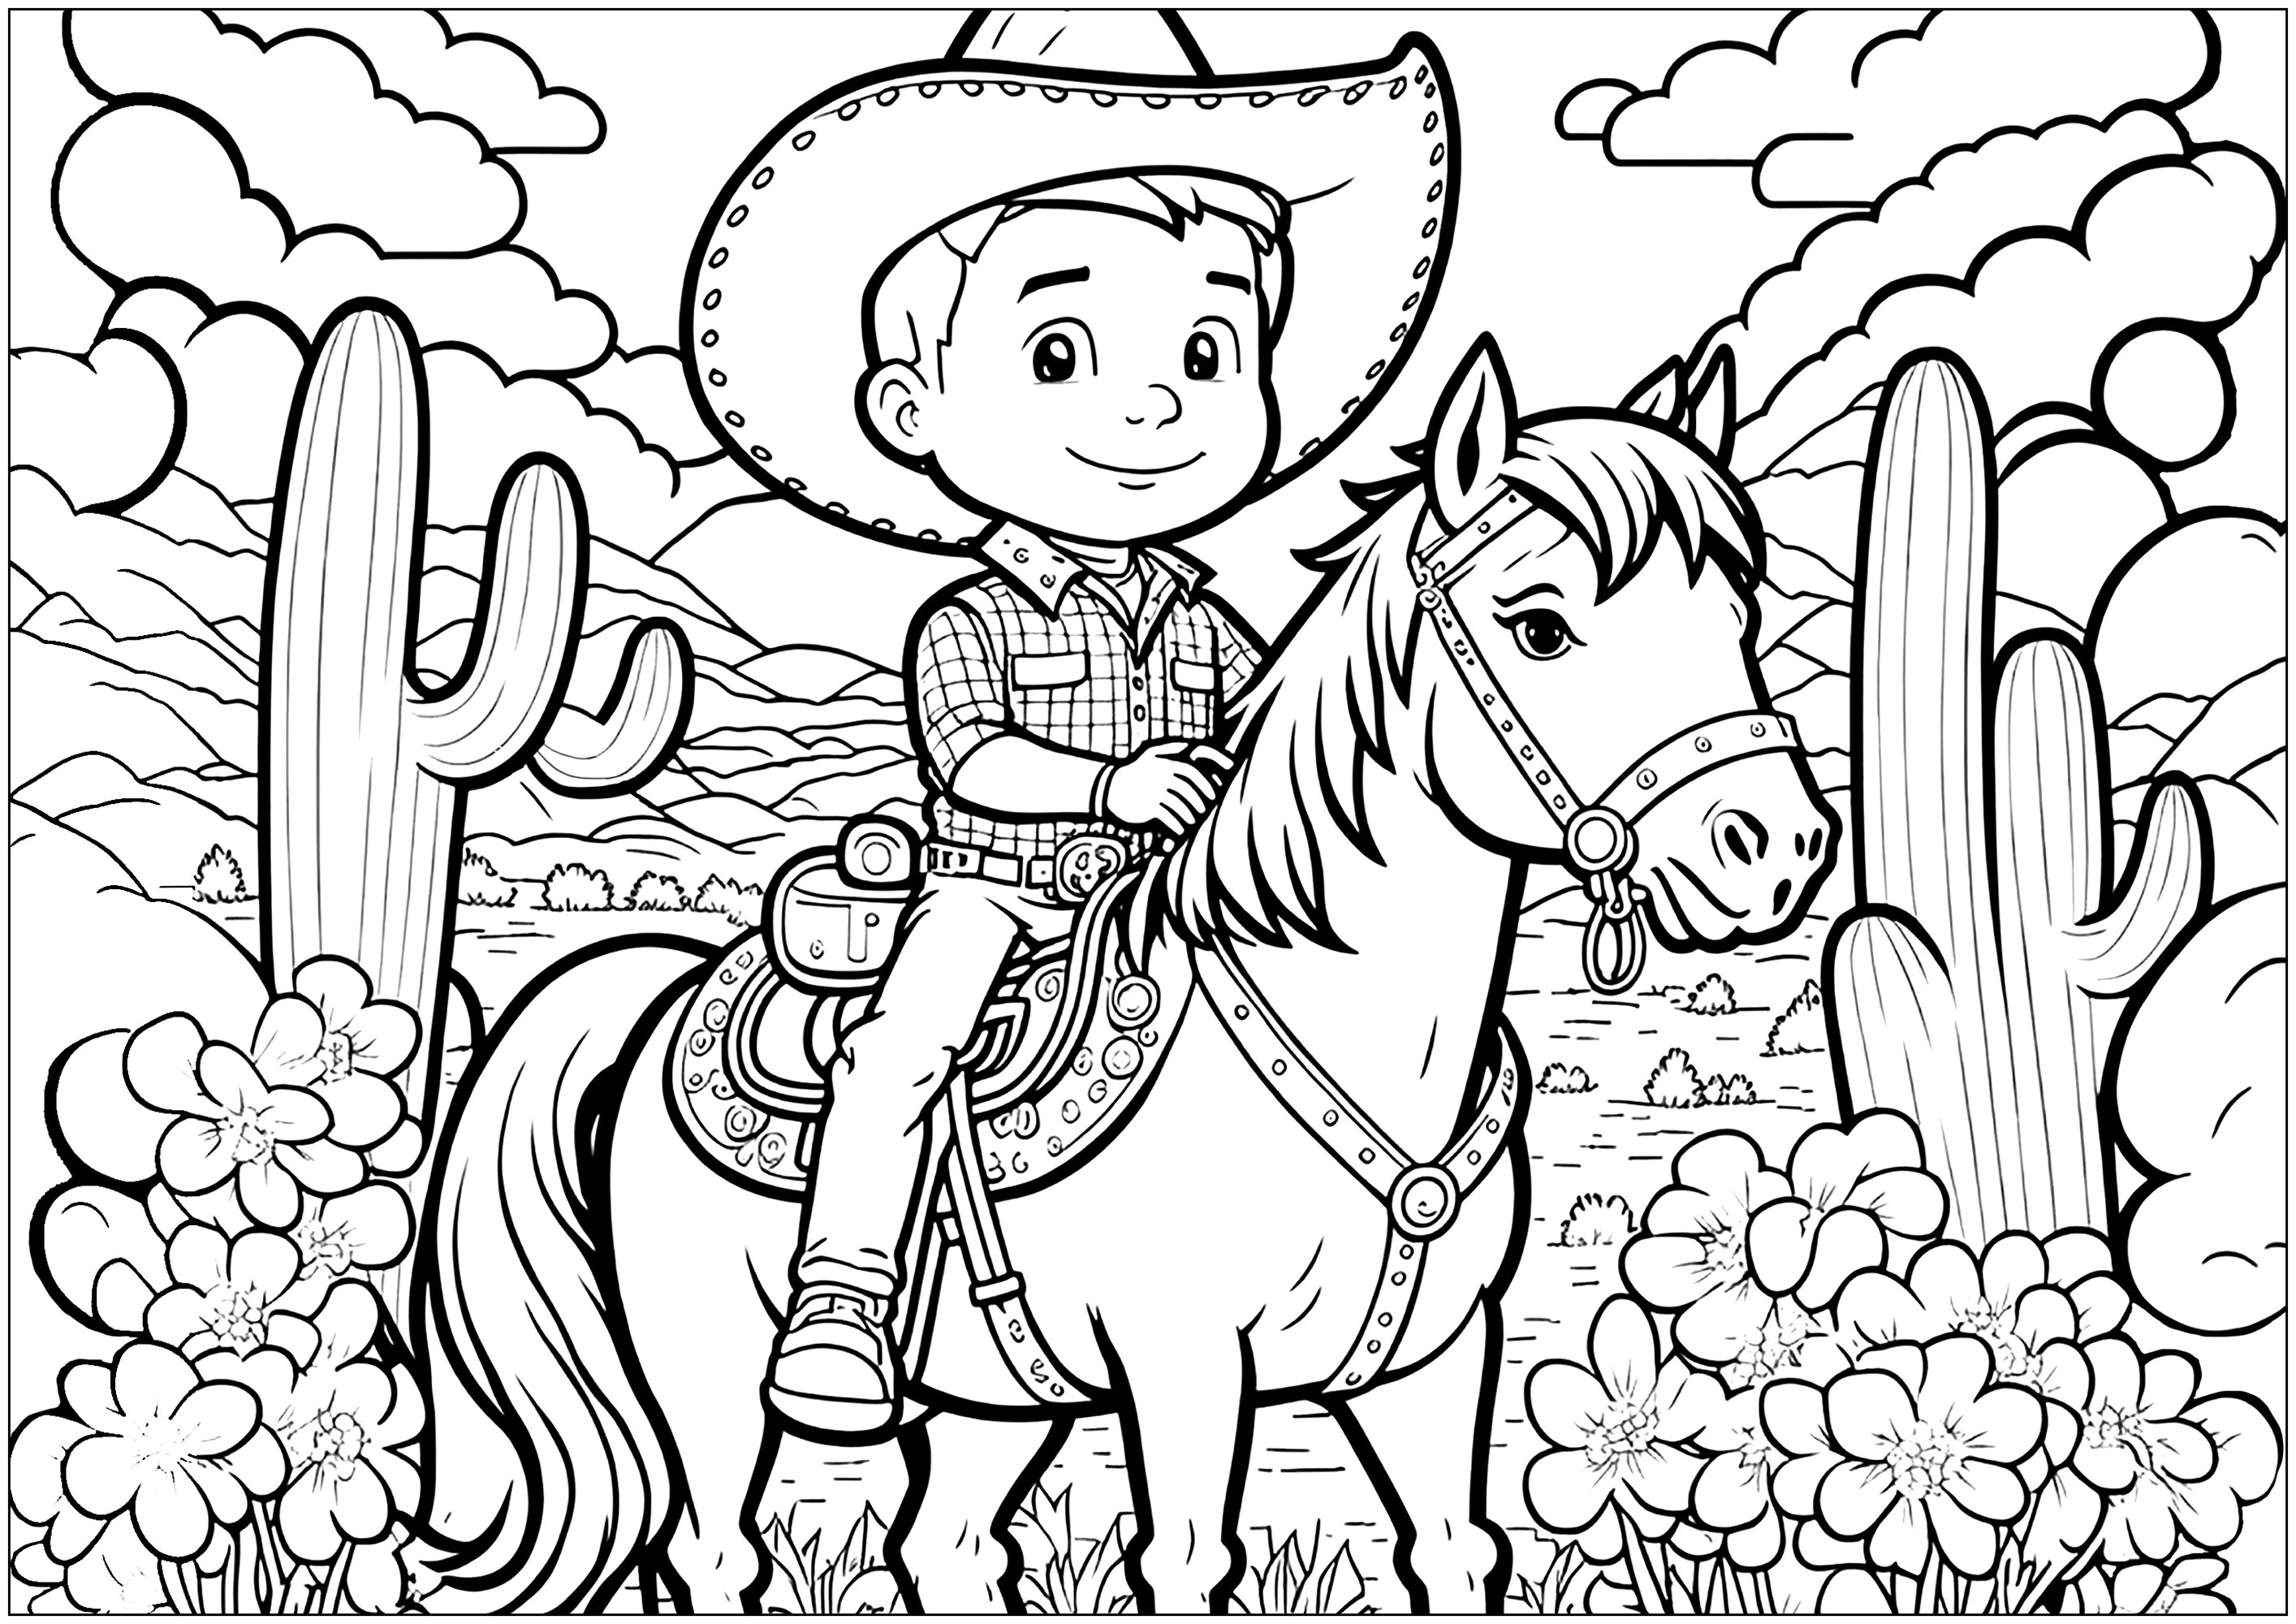 A young cowboy on his horse, with a very rich background (mountains, cactus, clouds ...)